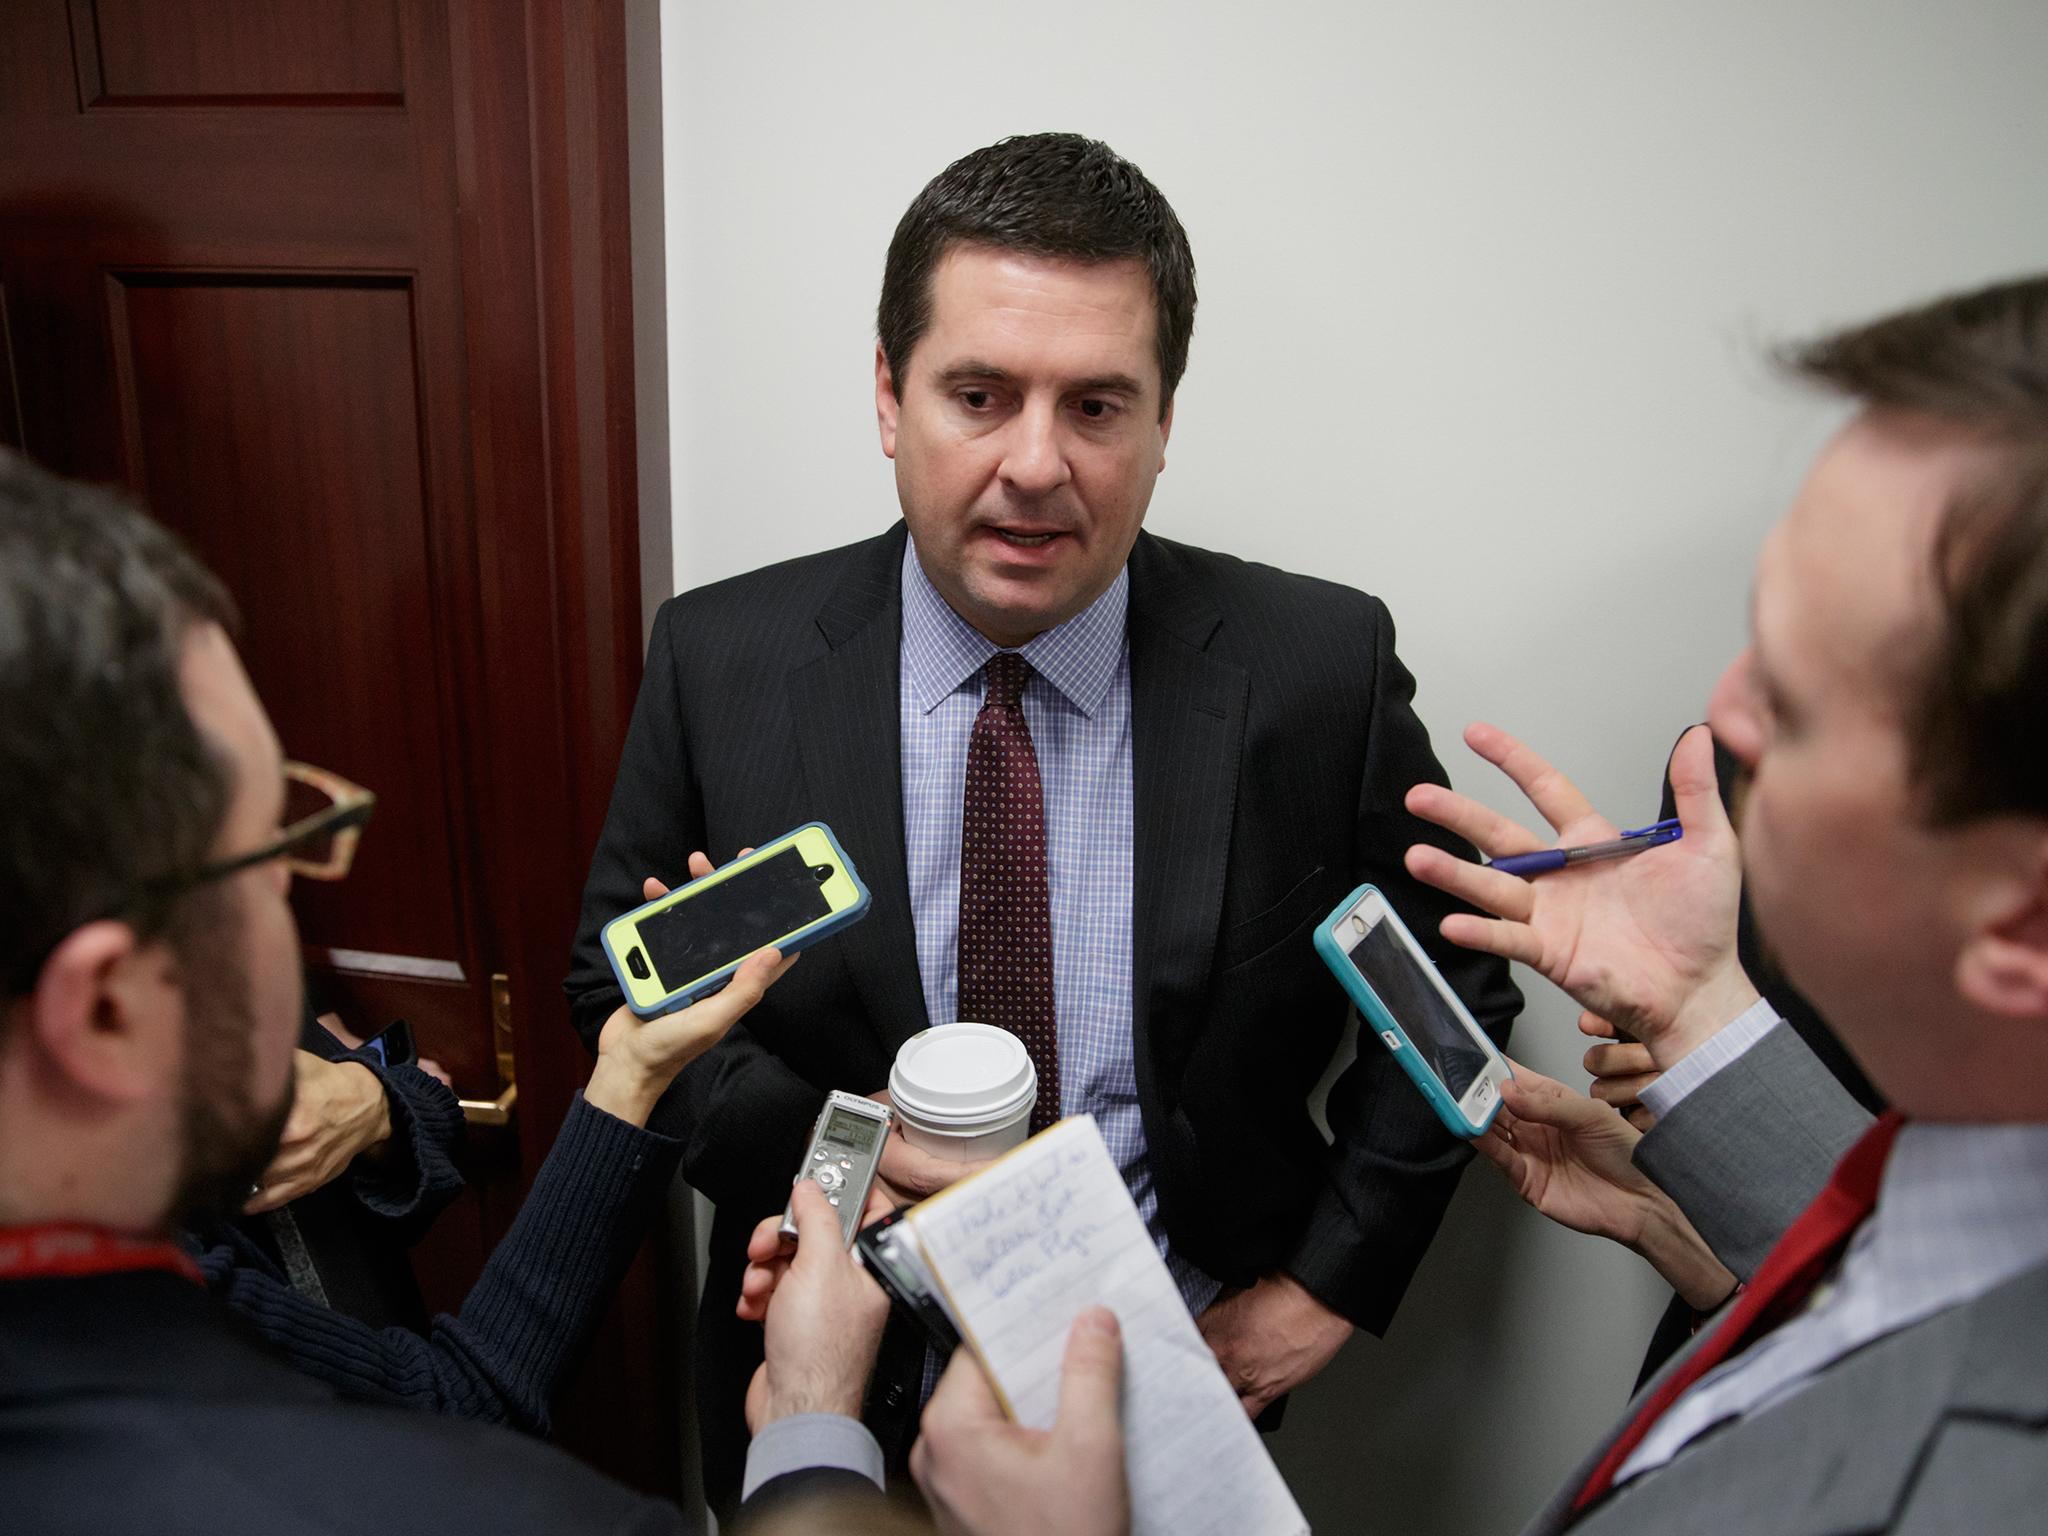 Devin Nunes said an investigation into Donald Trump would be a 'witch hunt against innocent Americans'